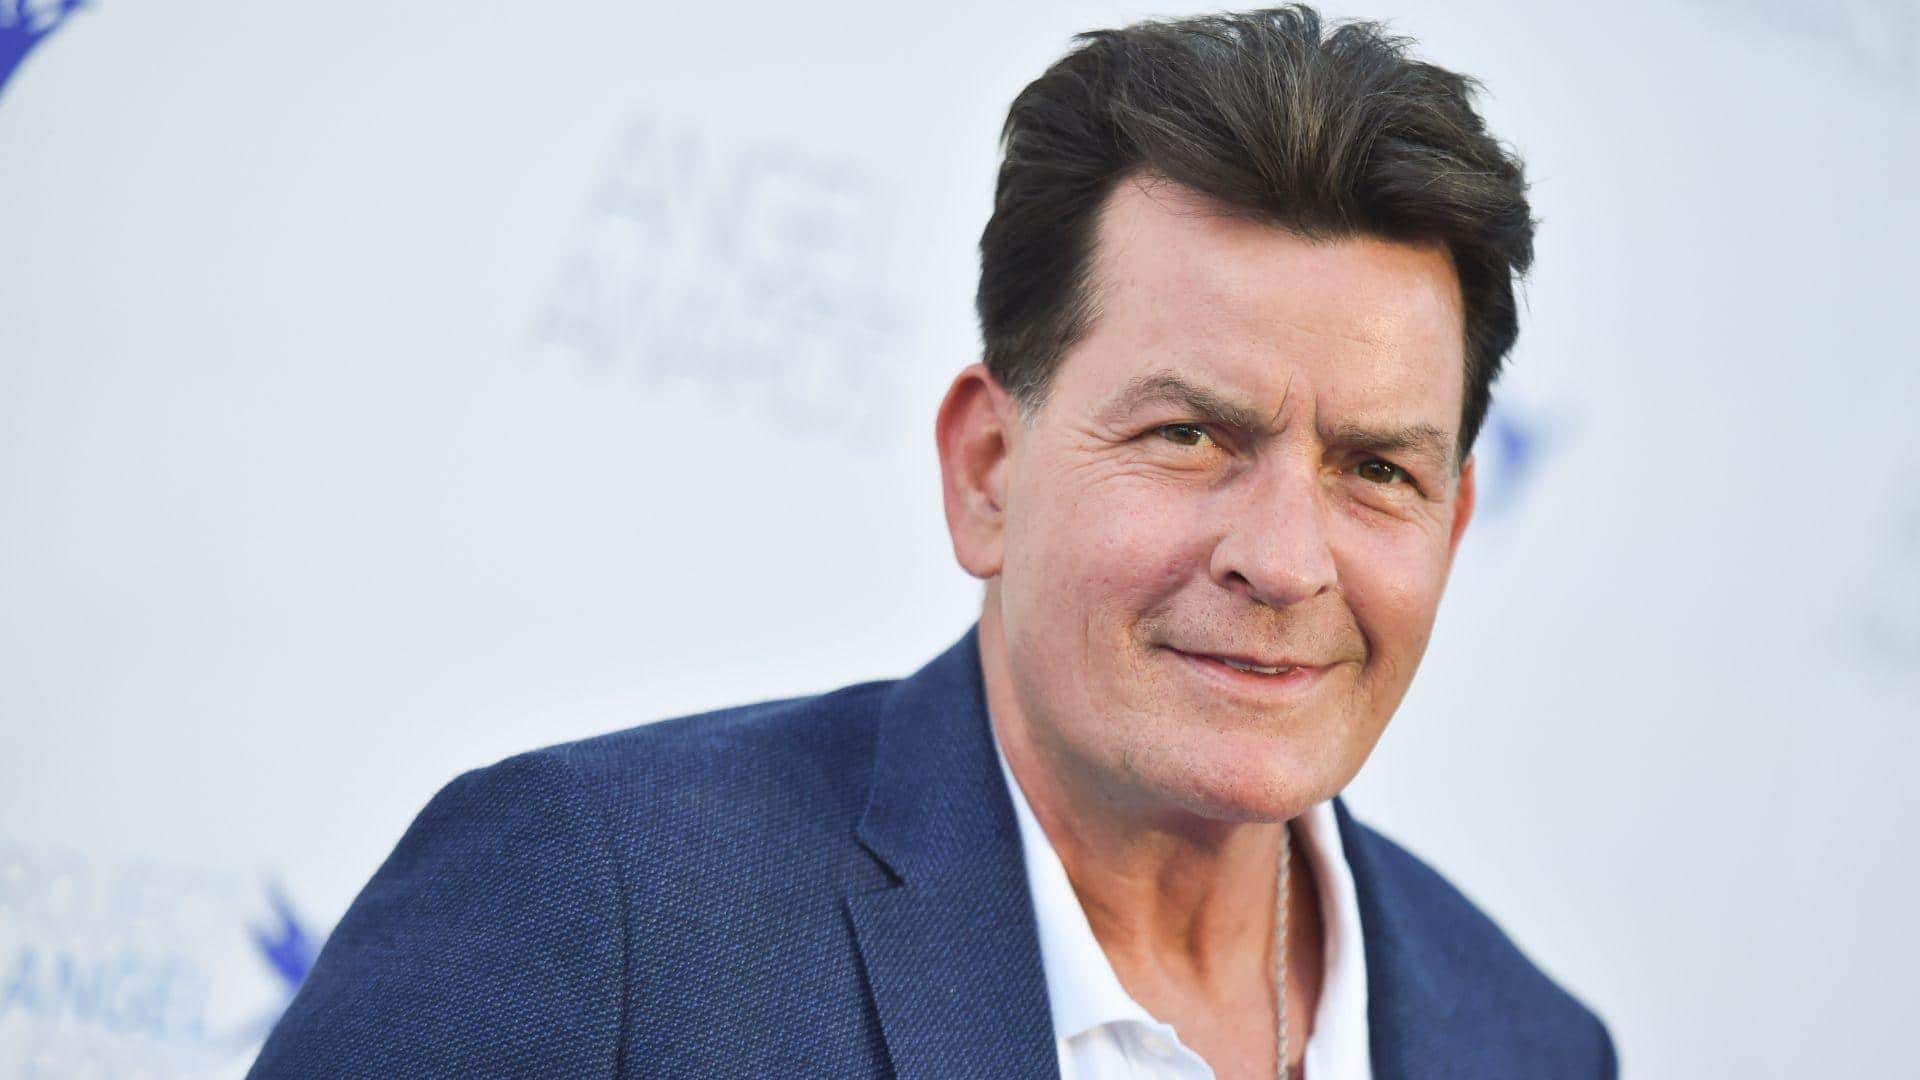 Charlie Sheen's neighbor charged with assault for allegedly attacking him